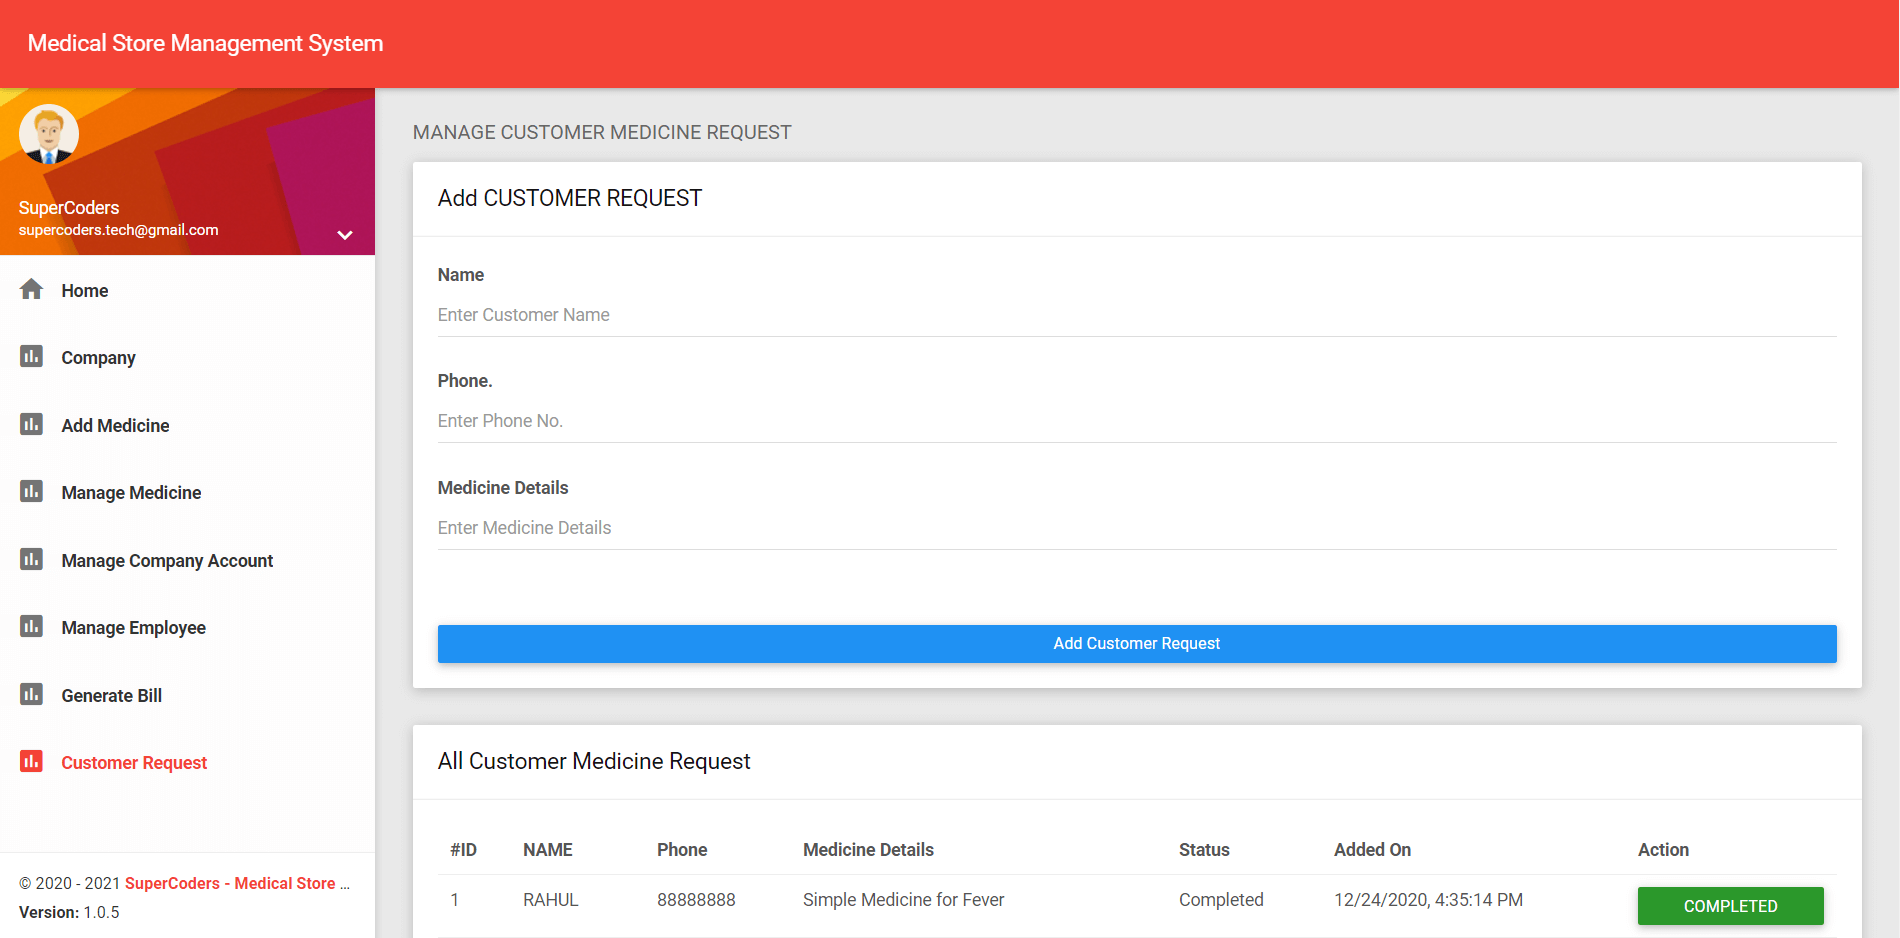 Medical Store Management System in Django - Add Customer Request